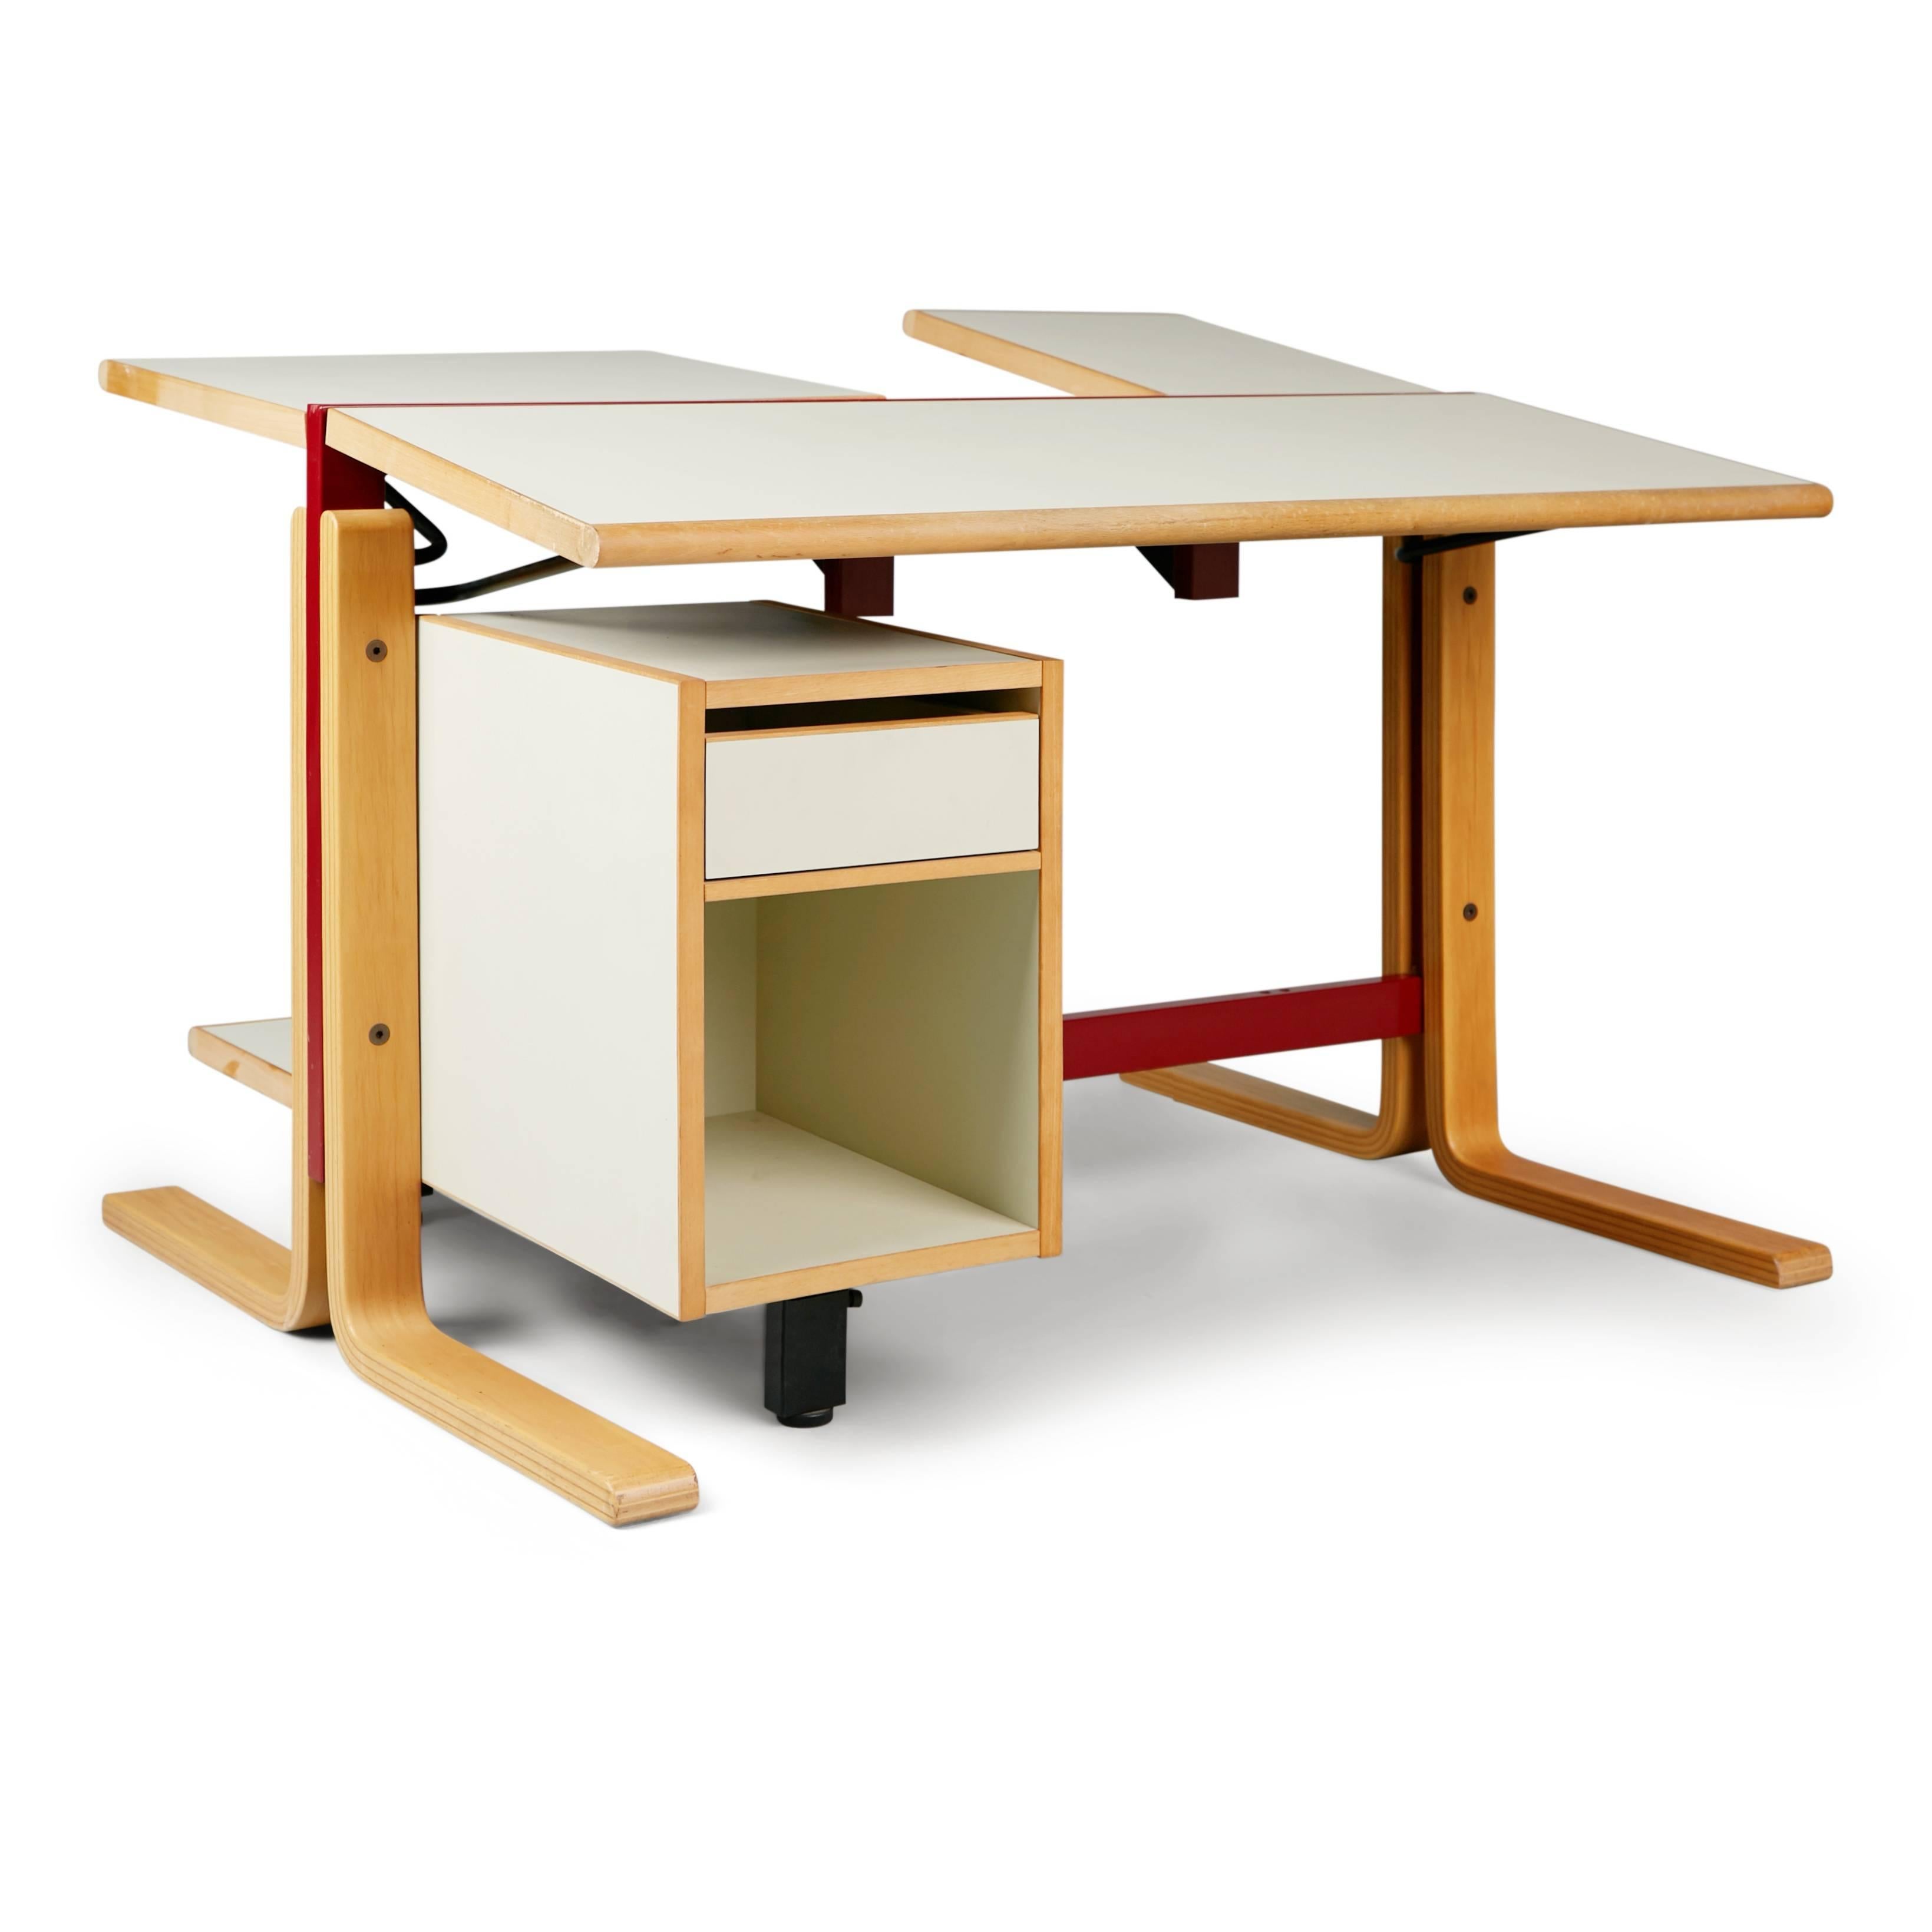 If you've got a penchant for nostalgia this Mactable, circa 1990 will do just the job. Built specifically for the Apple computer this fully adjustable desk was devised to outfit all your Macintosh accompaniments. Both sides of the desk surface can